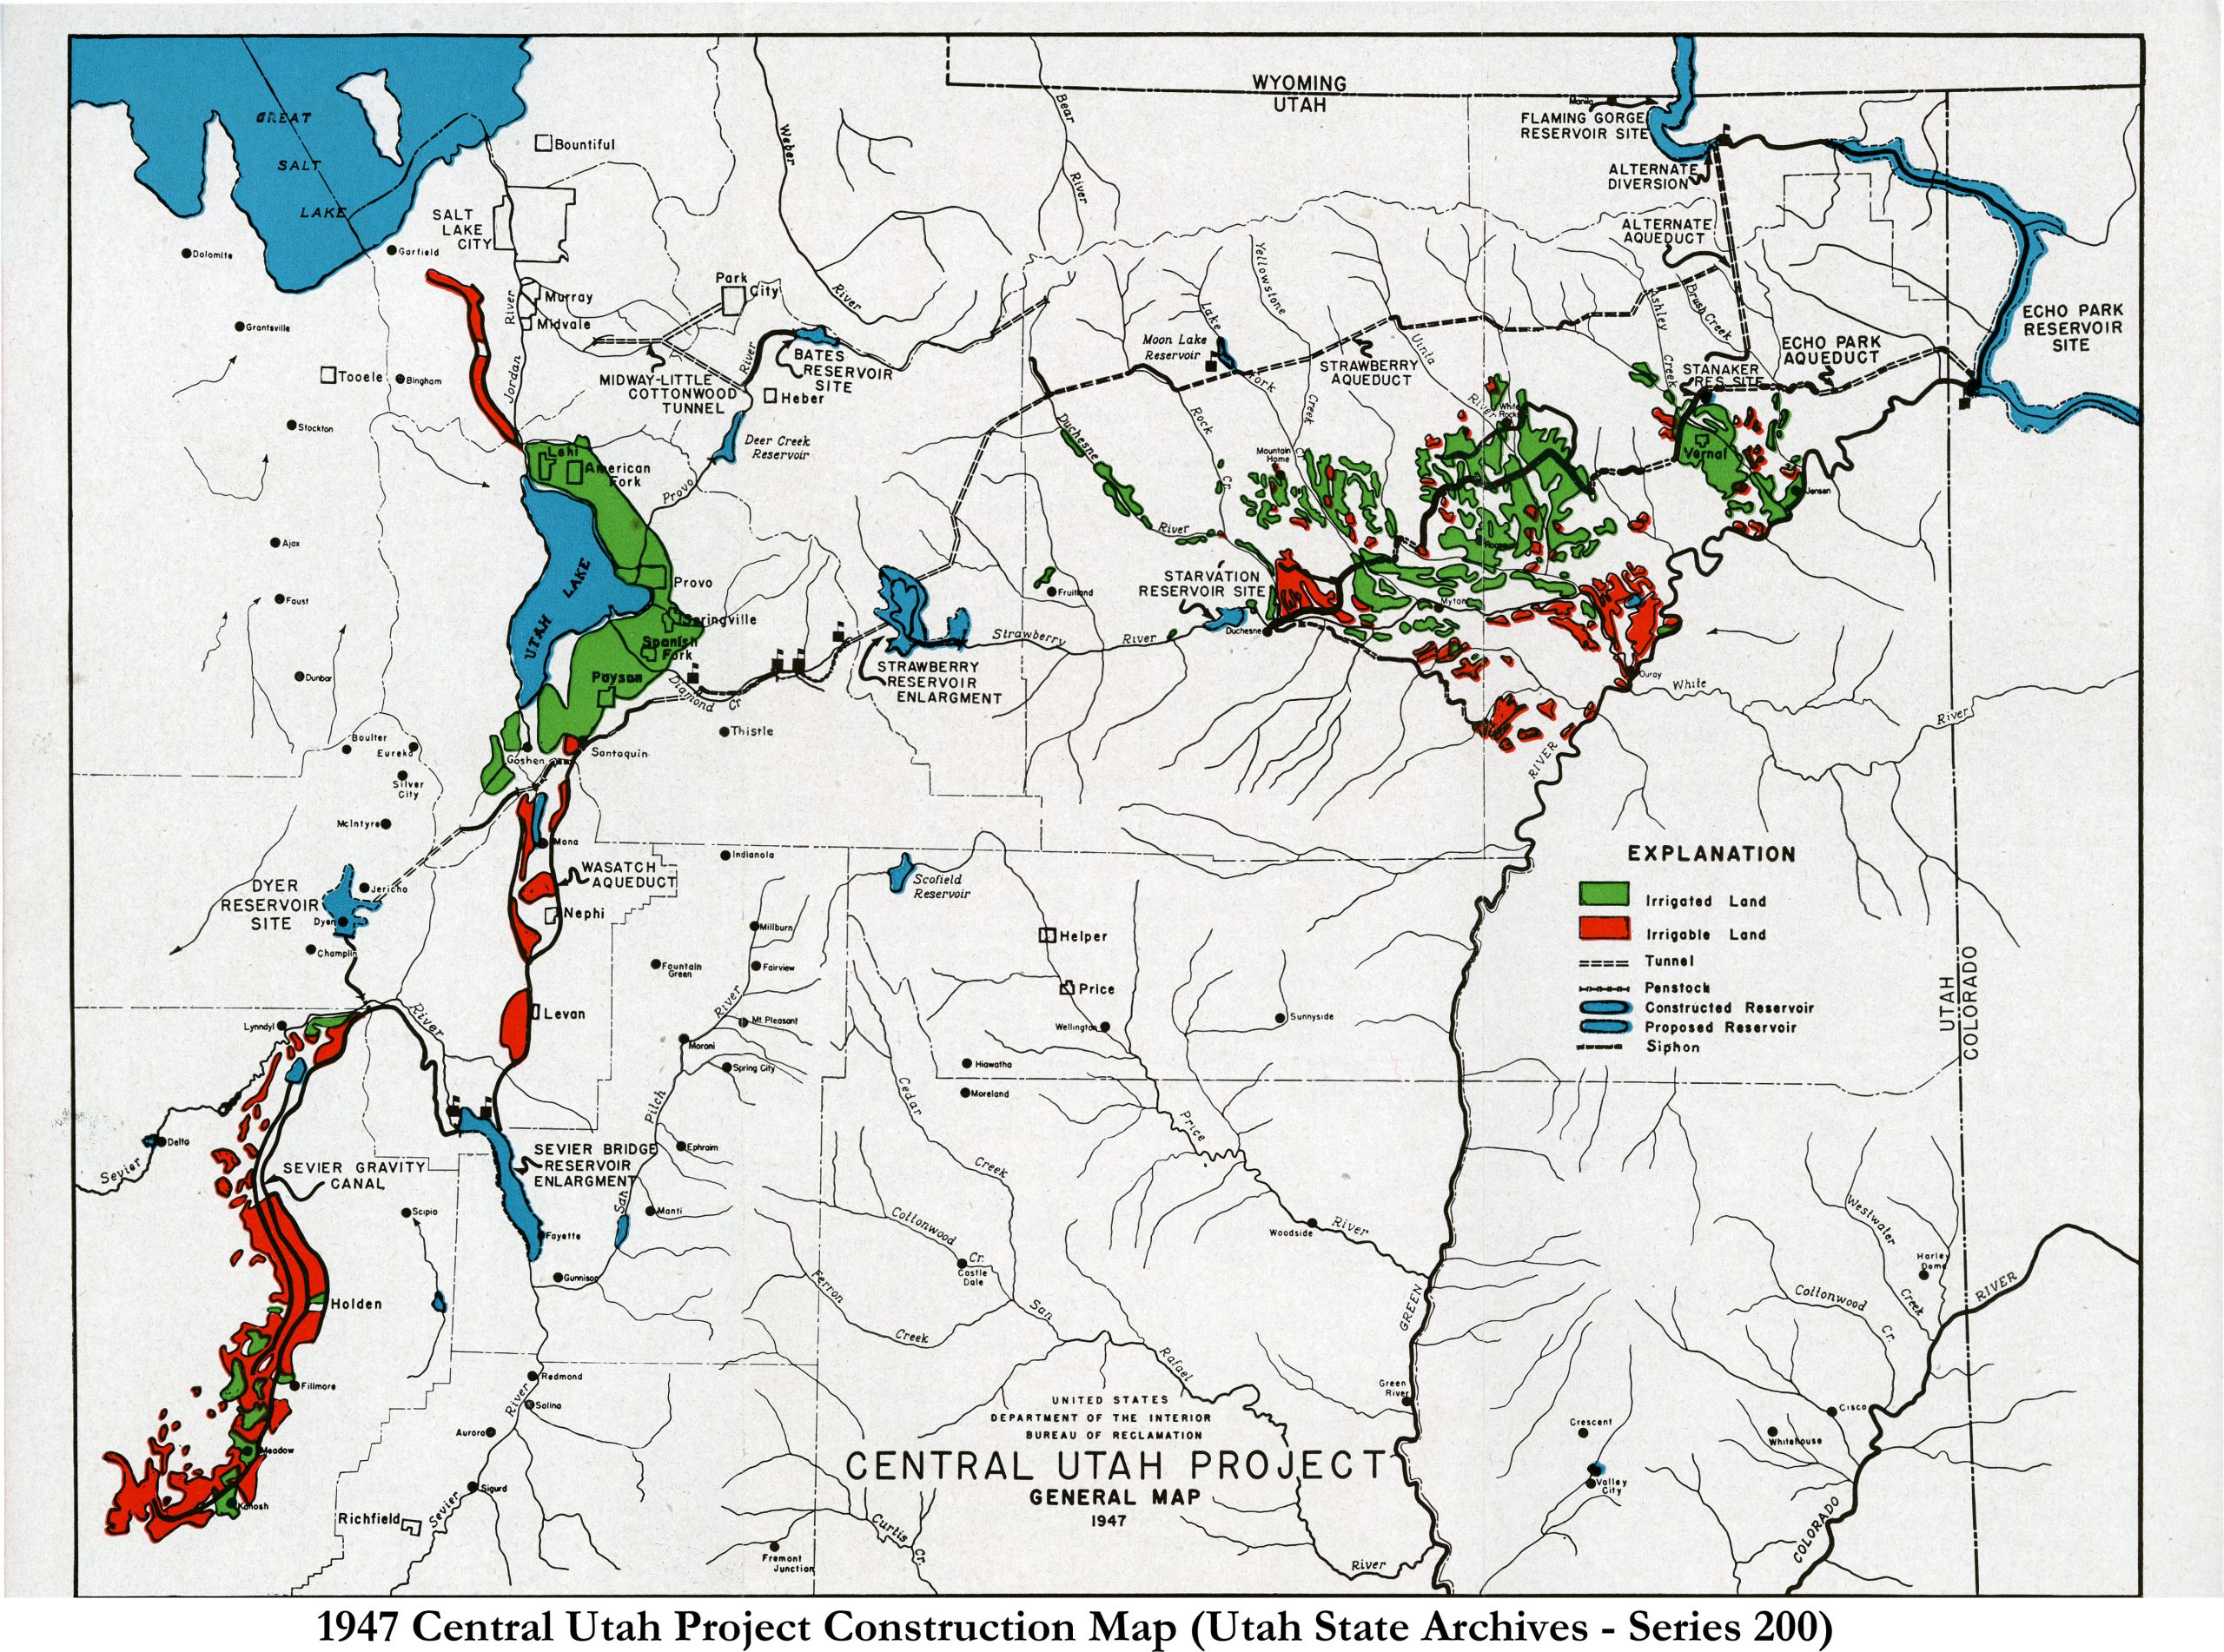 1947 conception of the Central Utah Project (series 200).